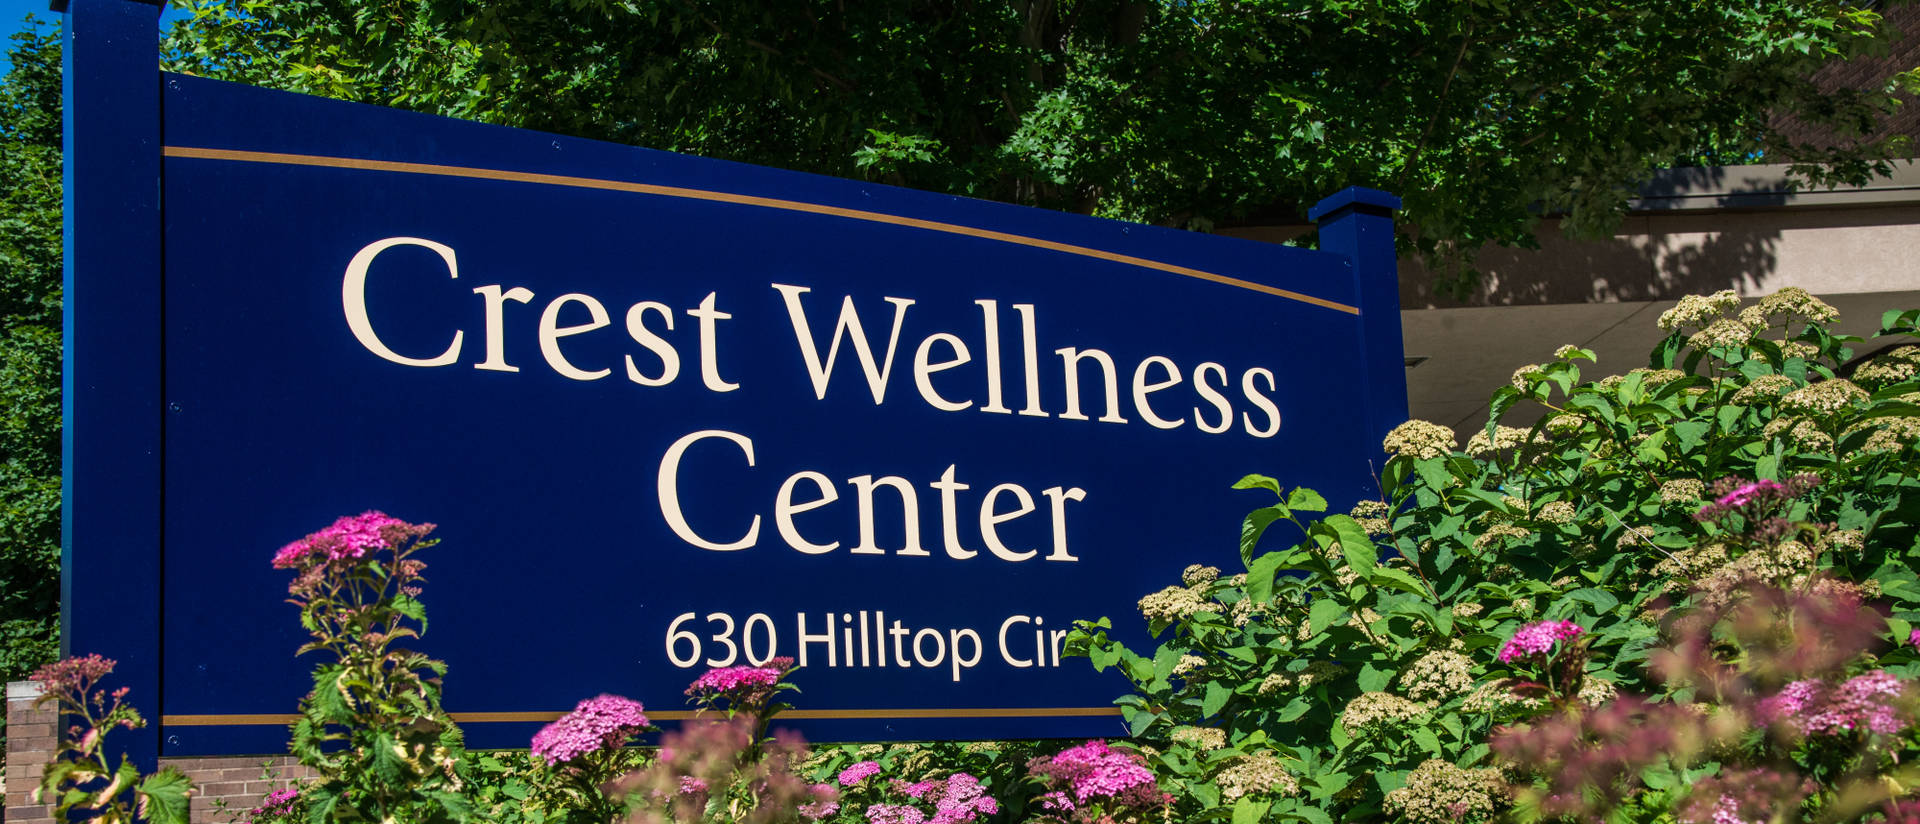 Crest Wellness Center sign surrounded by flowers